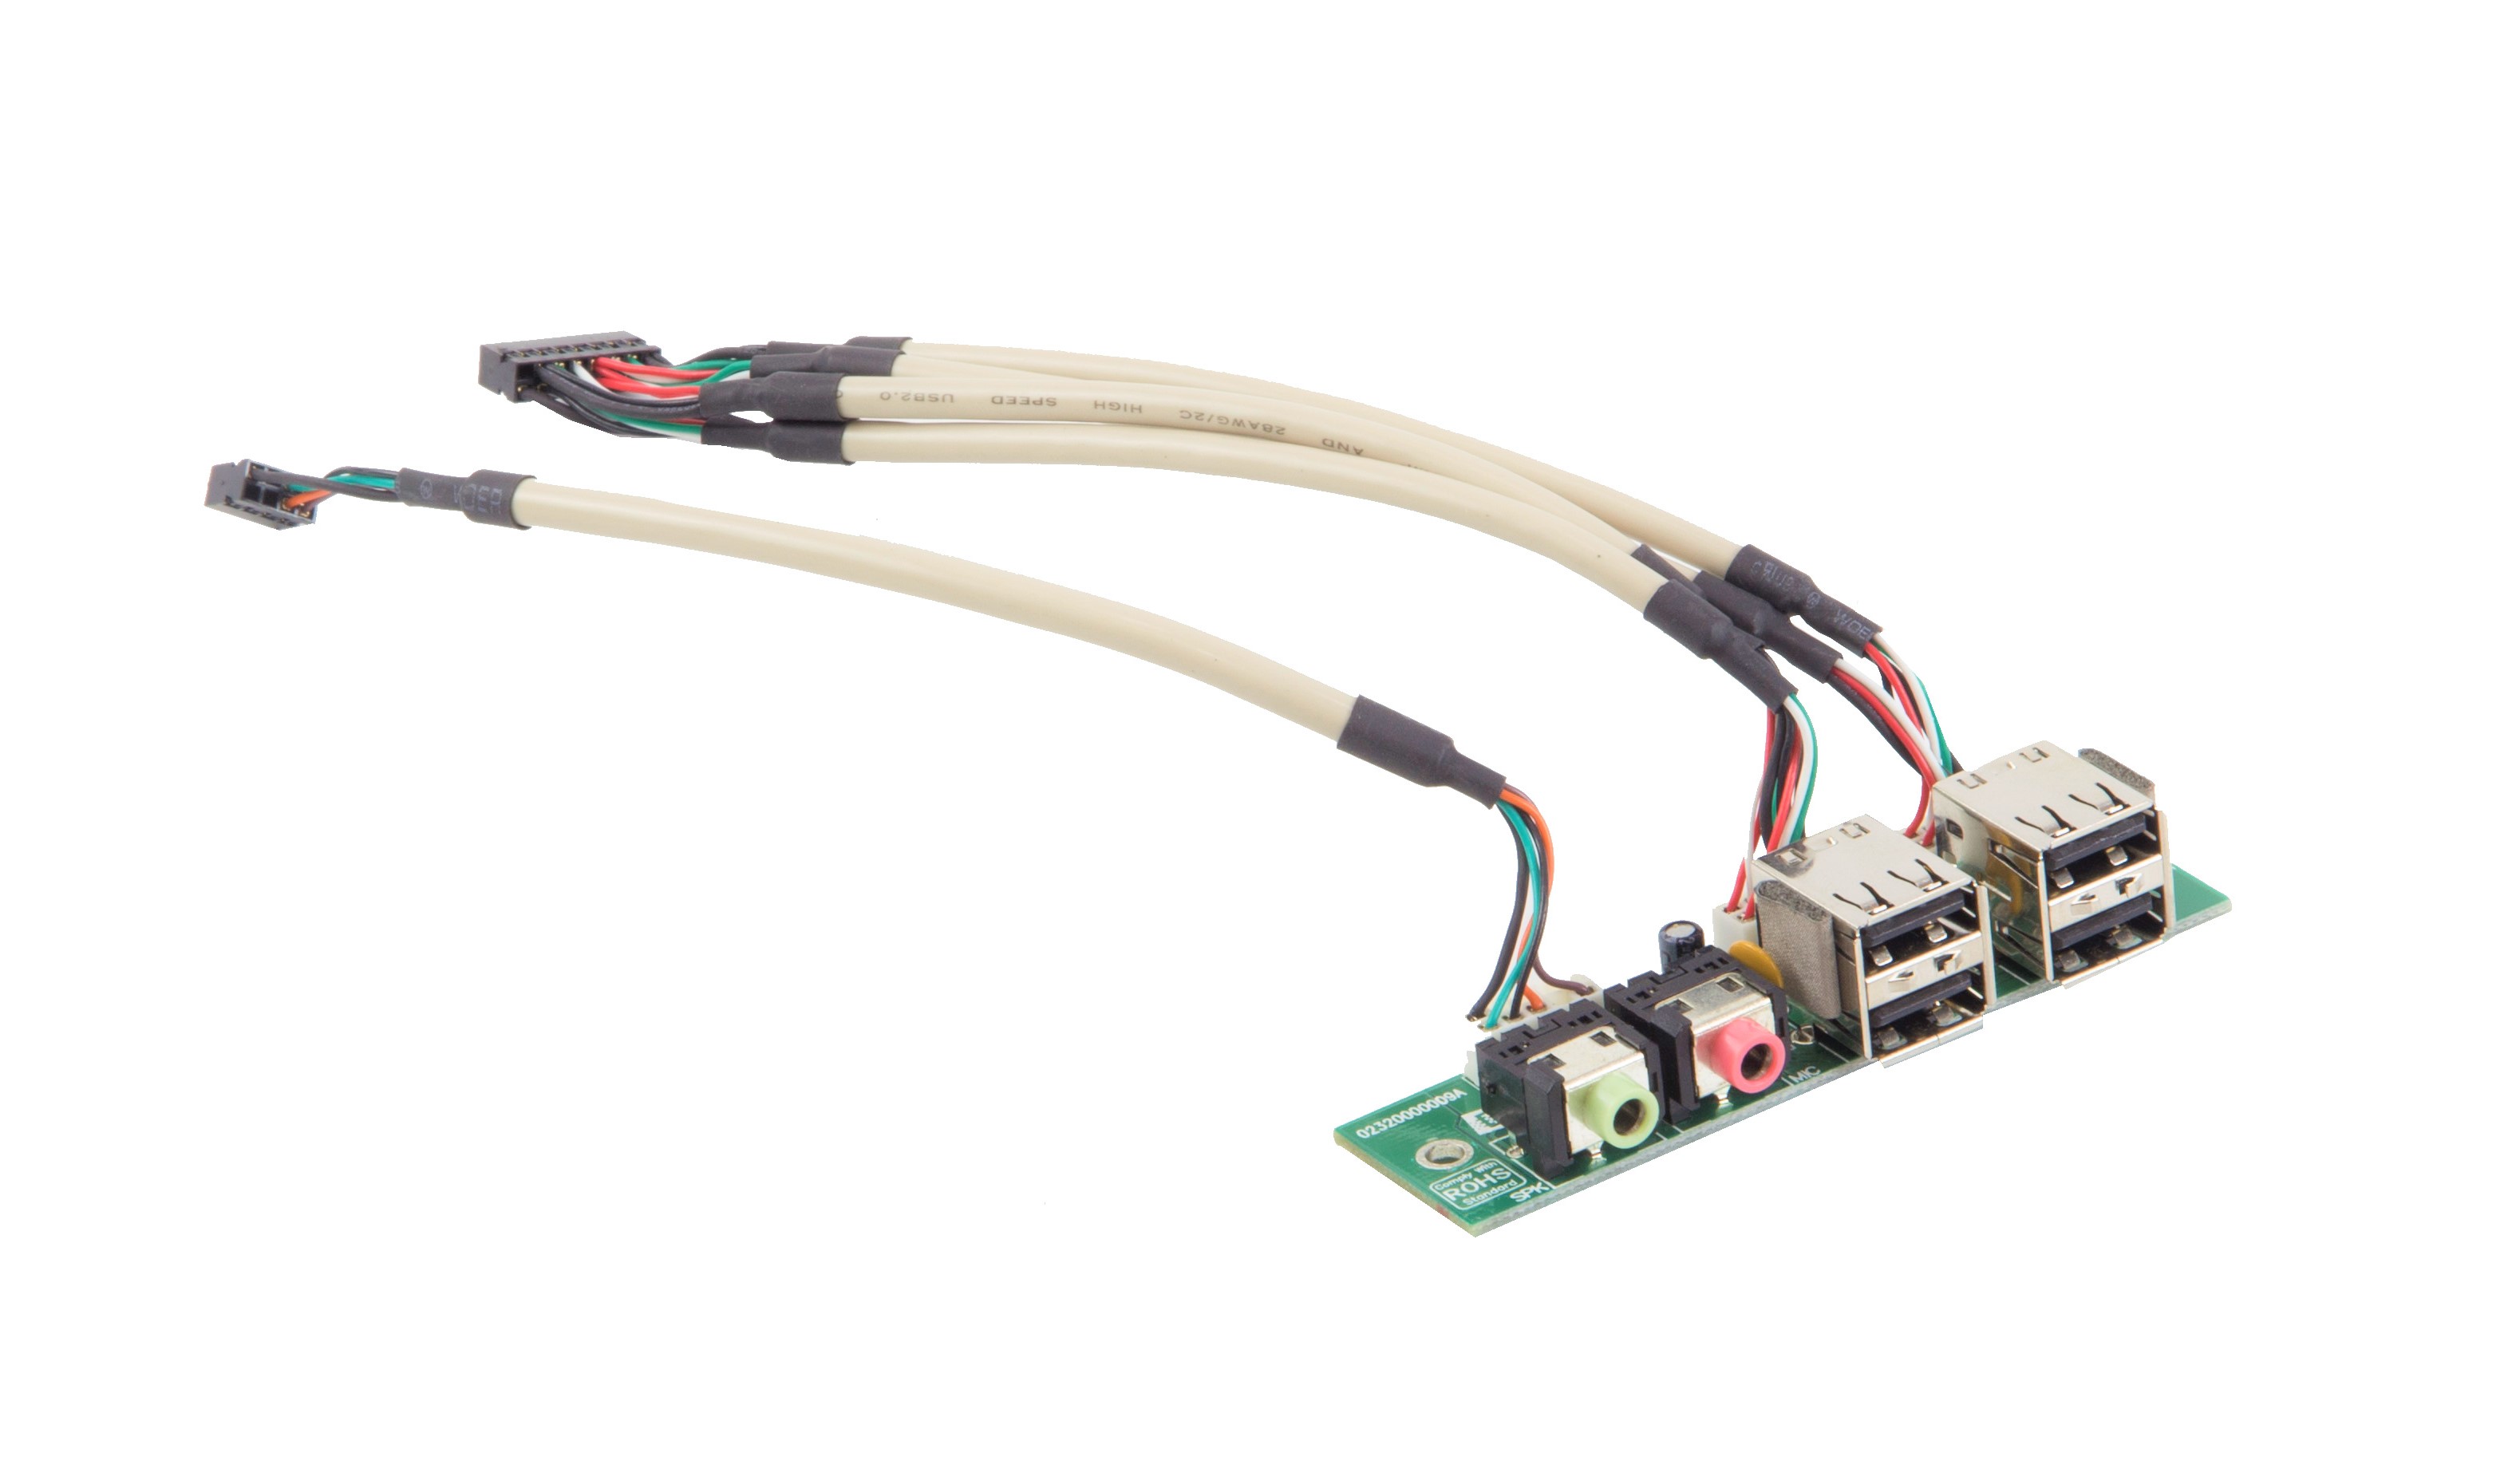 USB/AUDIO BOARD+150mm CABLE  |Products|Accessories|Others